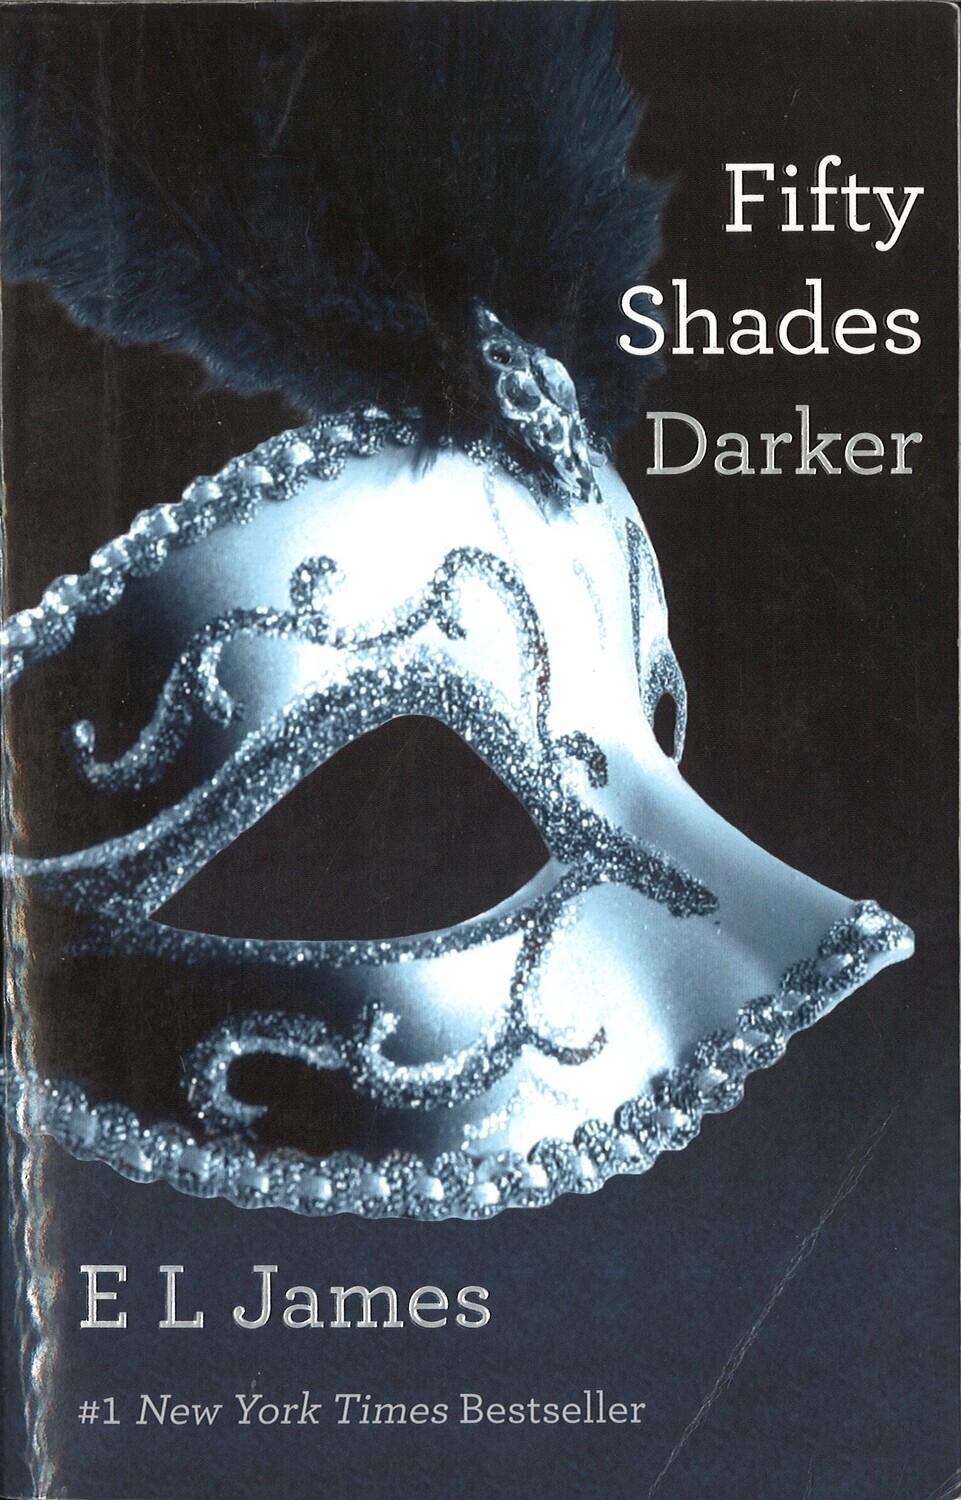 Fifty Shades Darker (Book 2 of Fifty Shades Trilogy